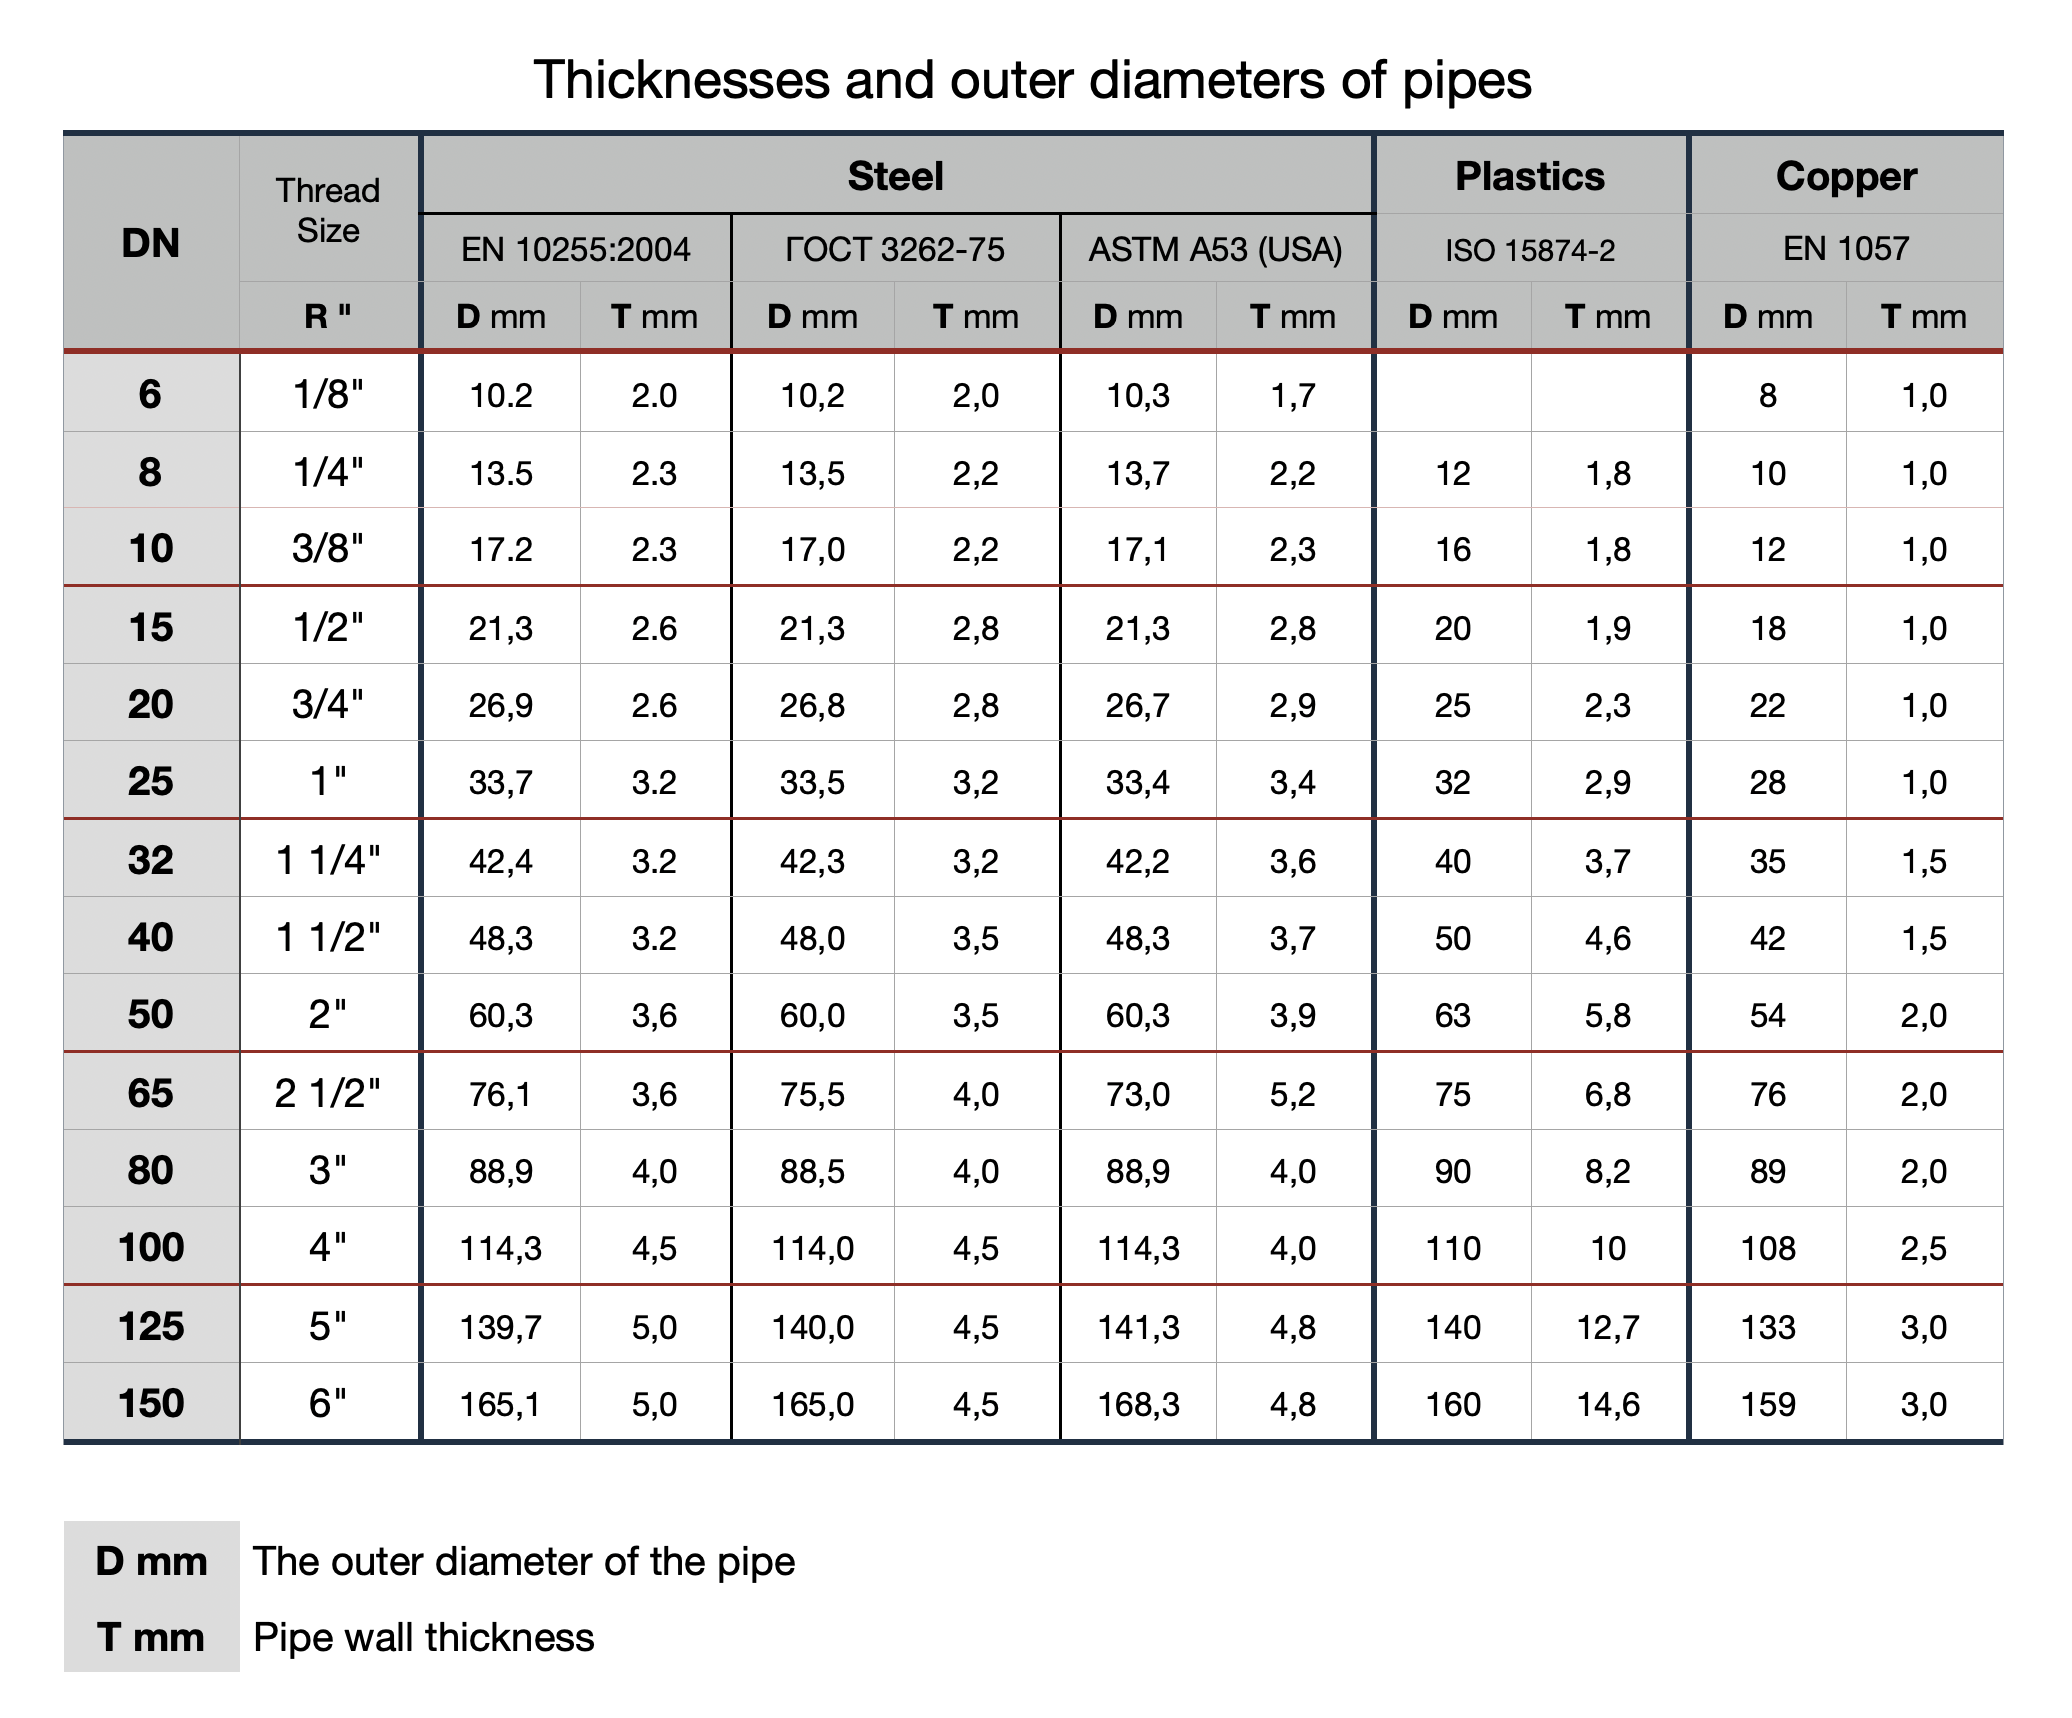 Thicknesses and outer diameters of pipes